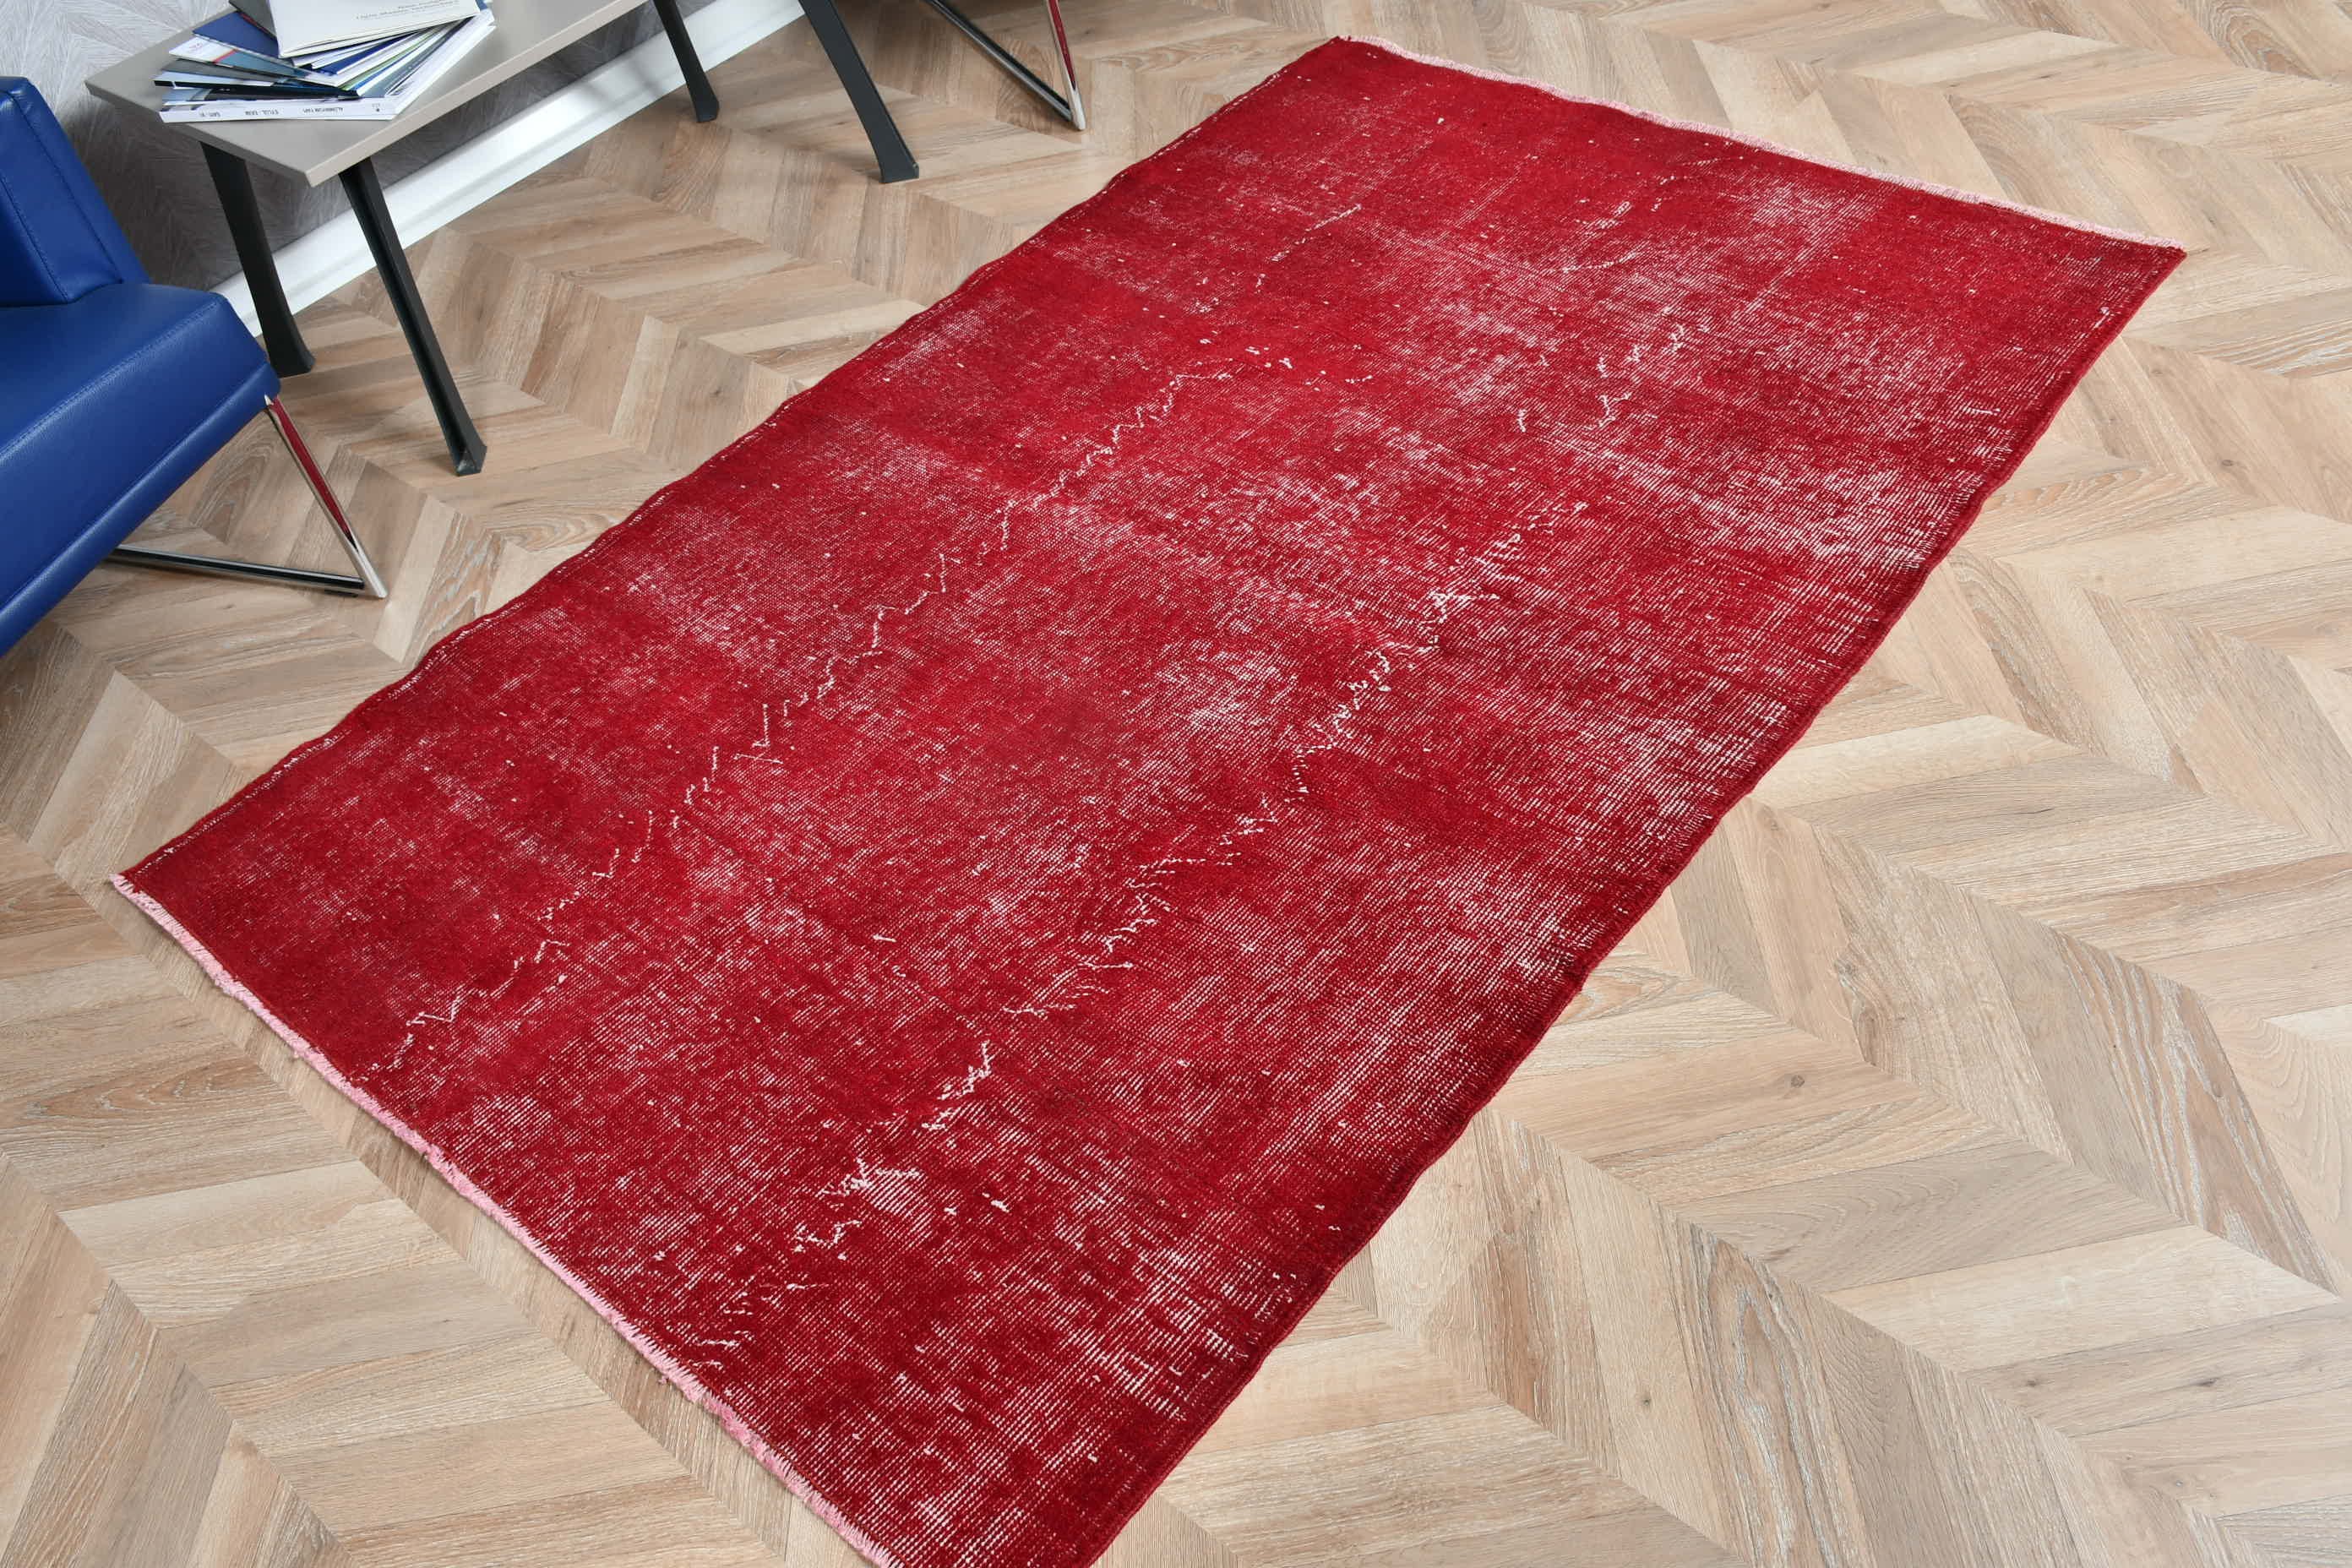 4x6 ft Accent Rugs, Old Rug, Vintage Rug, Oushak Rugs, Rugs for Kitchen, Bedroom Rugs, Turkish Rug, Entry Rug, Nursery Rug, Red Kitchen Rug